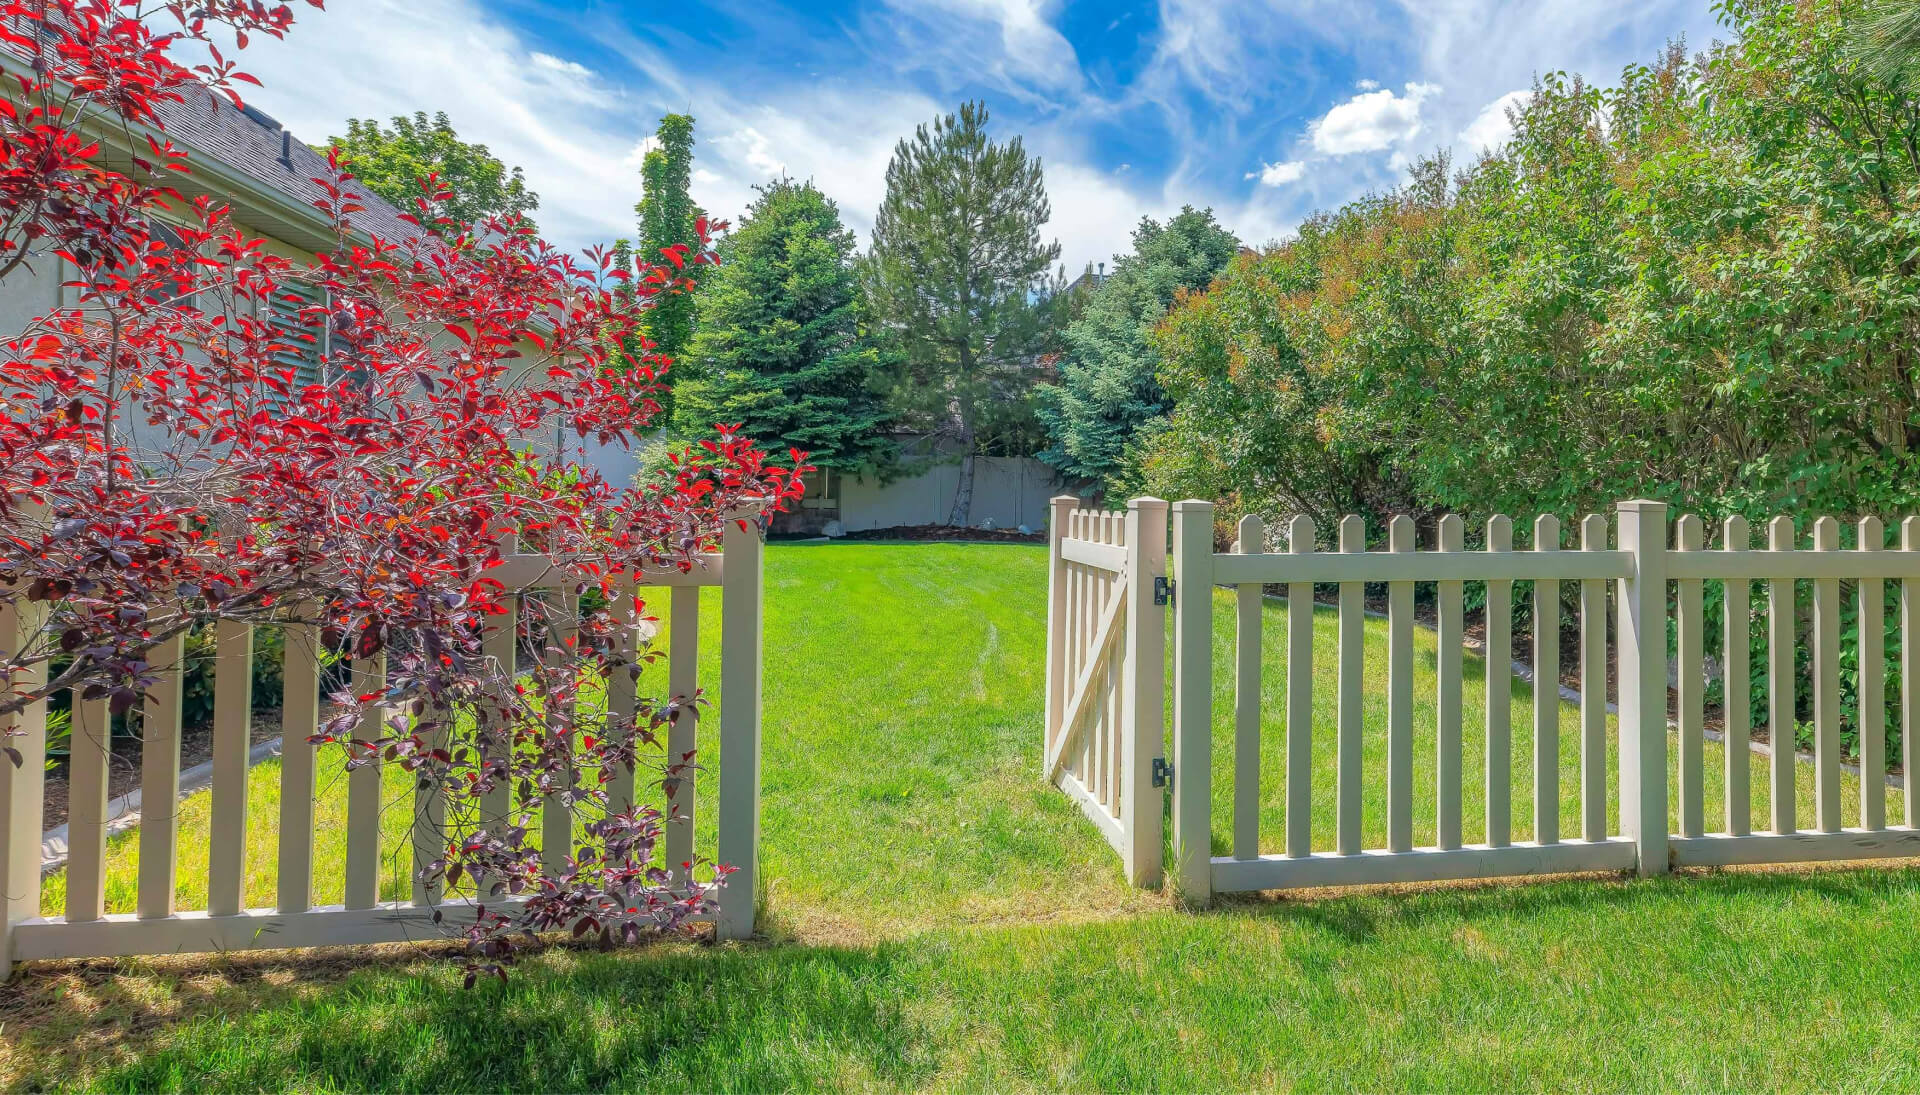 A functional fence gate providing access to a well-maintained backyard, surrounded by a wooden fence in Columbia